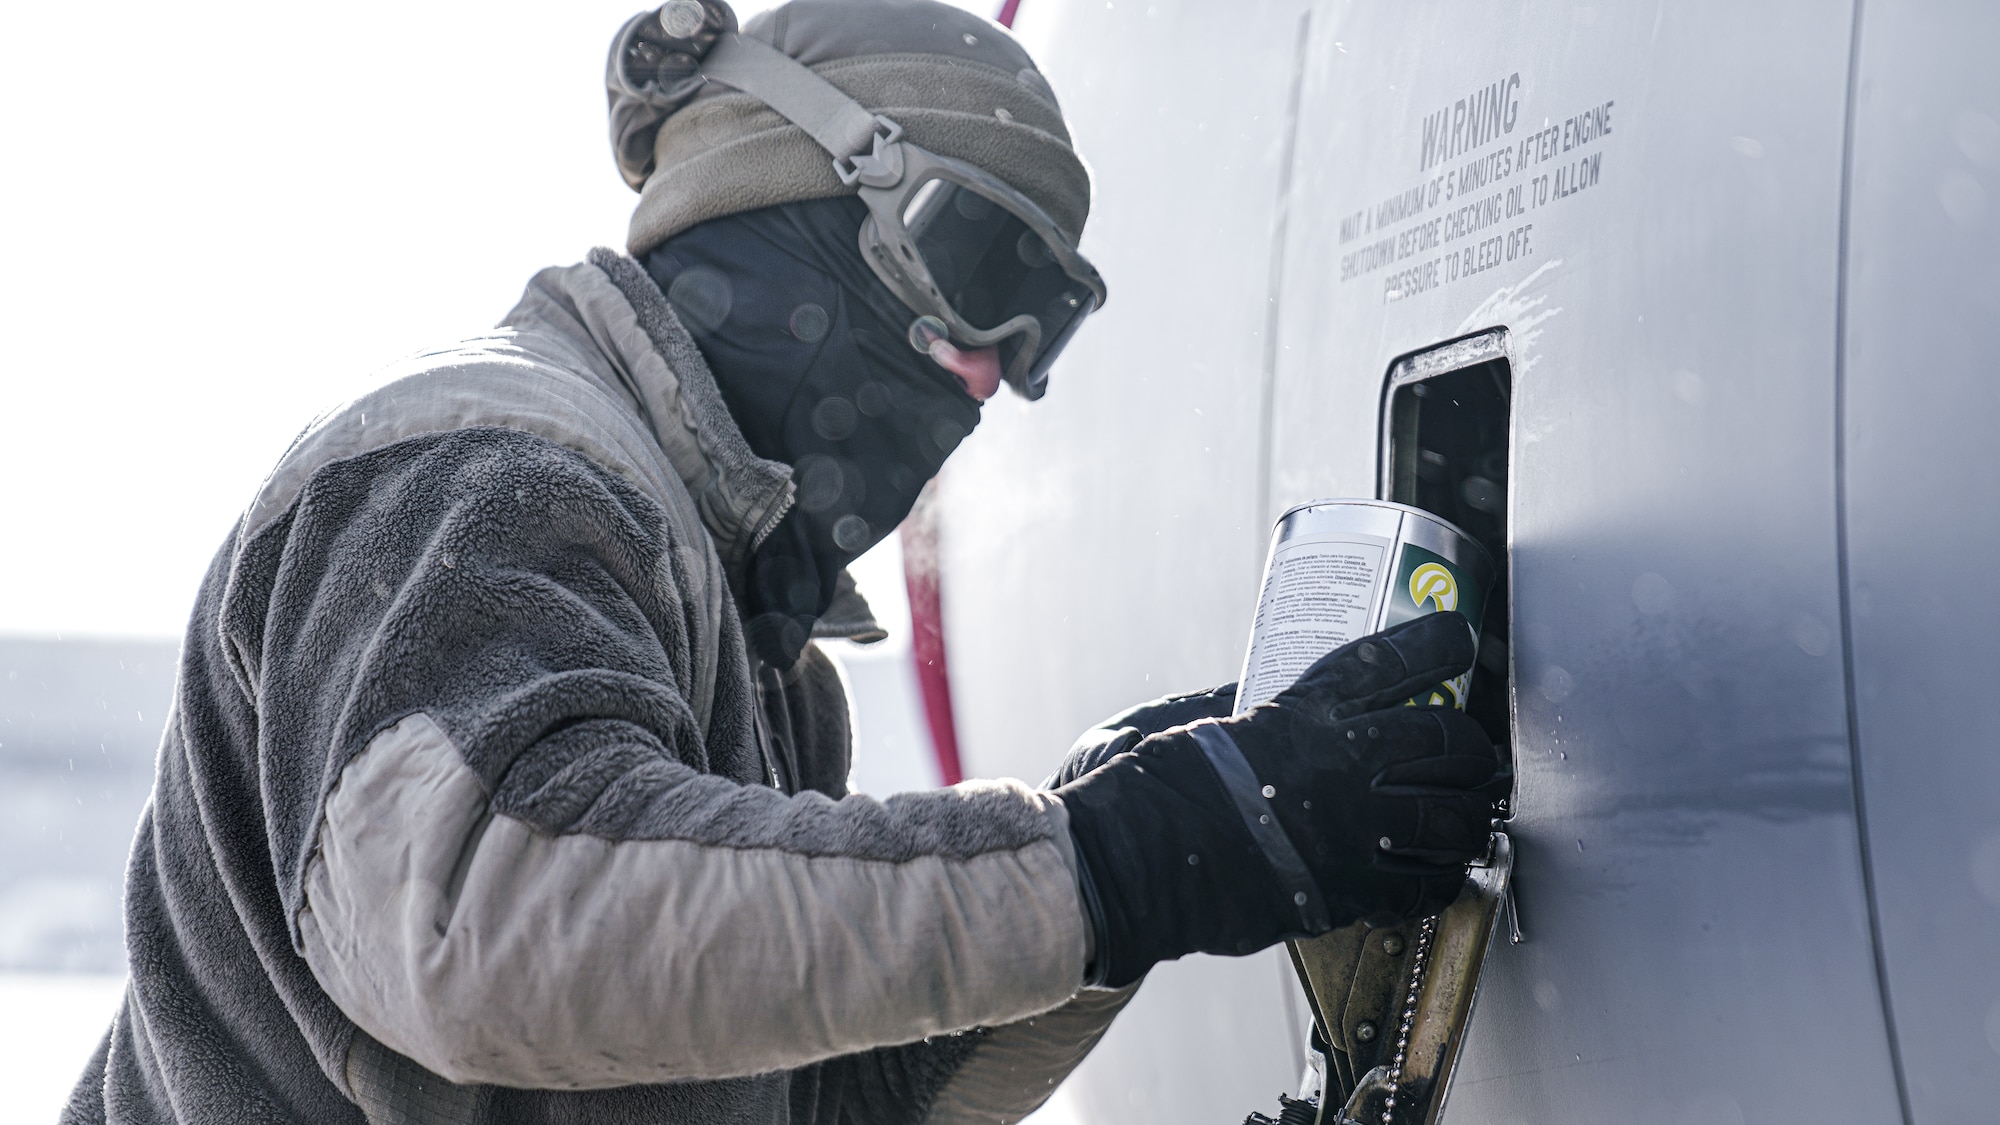 U.S. Air Force Senior Airman Jeremiah Green, 6th Aircraft Maintenance Squadron crew chief, services engine oil on a KC-135 Stratotanker aircraft assigned to the 6th Air Refueling Wing during North American Aerospace Defense Command's (NORAD) Operation Noble Defender (OND), March 15, 2022.